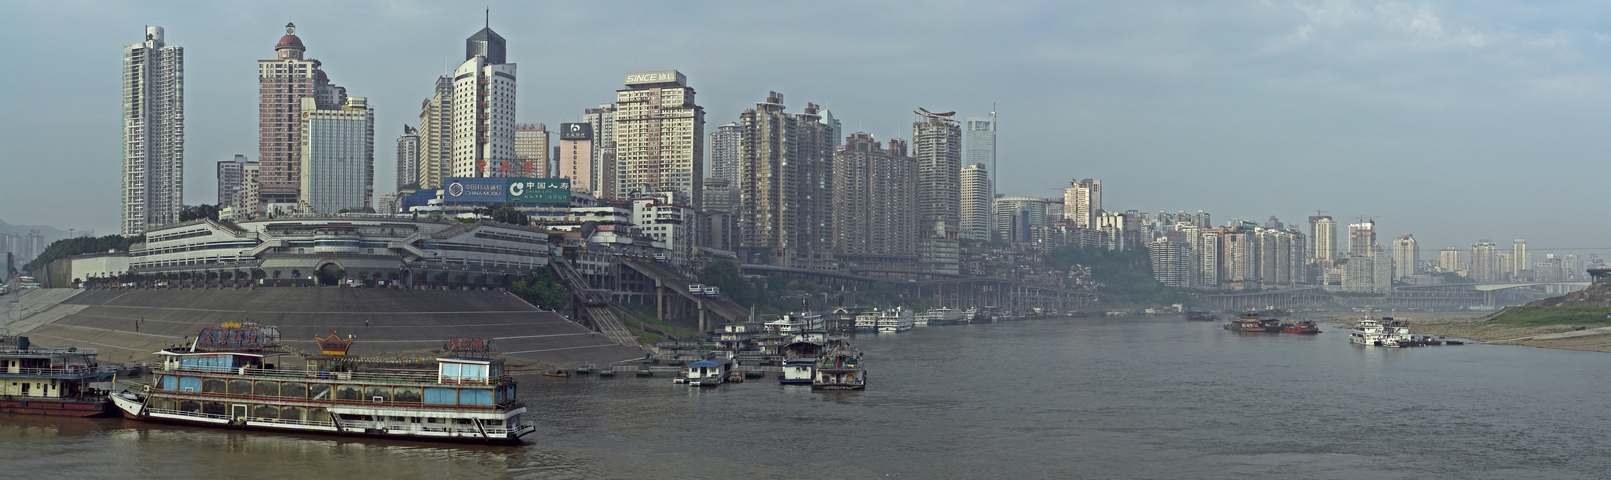 Chongqing11.jpg - 3 images, Size: 8155 x 2430, FOV: 82.20 x 24.49, RMS: 3.23, Lens: Standard, Projection: Spherical, Color: LDR